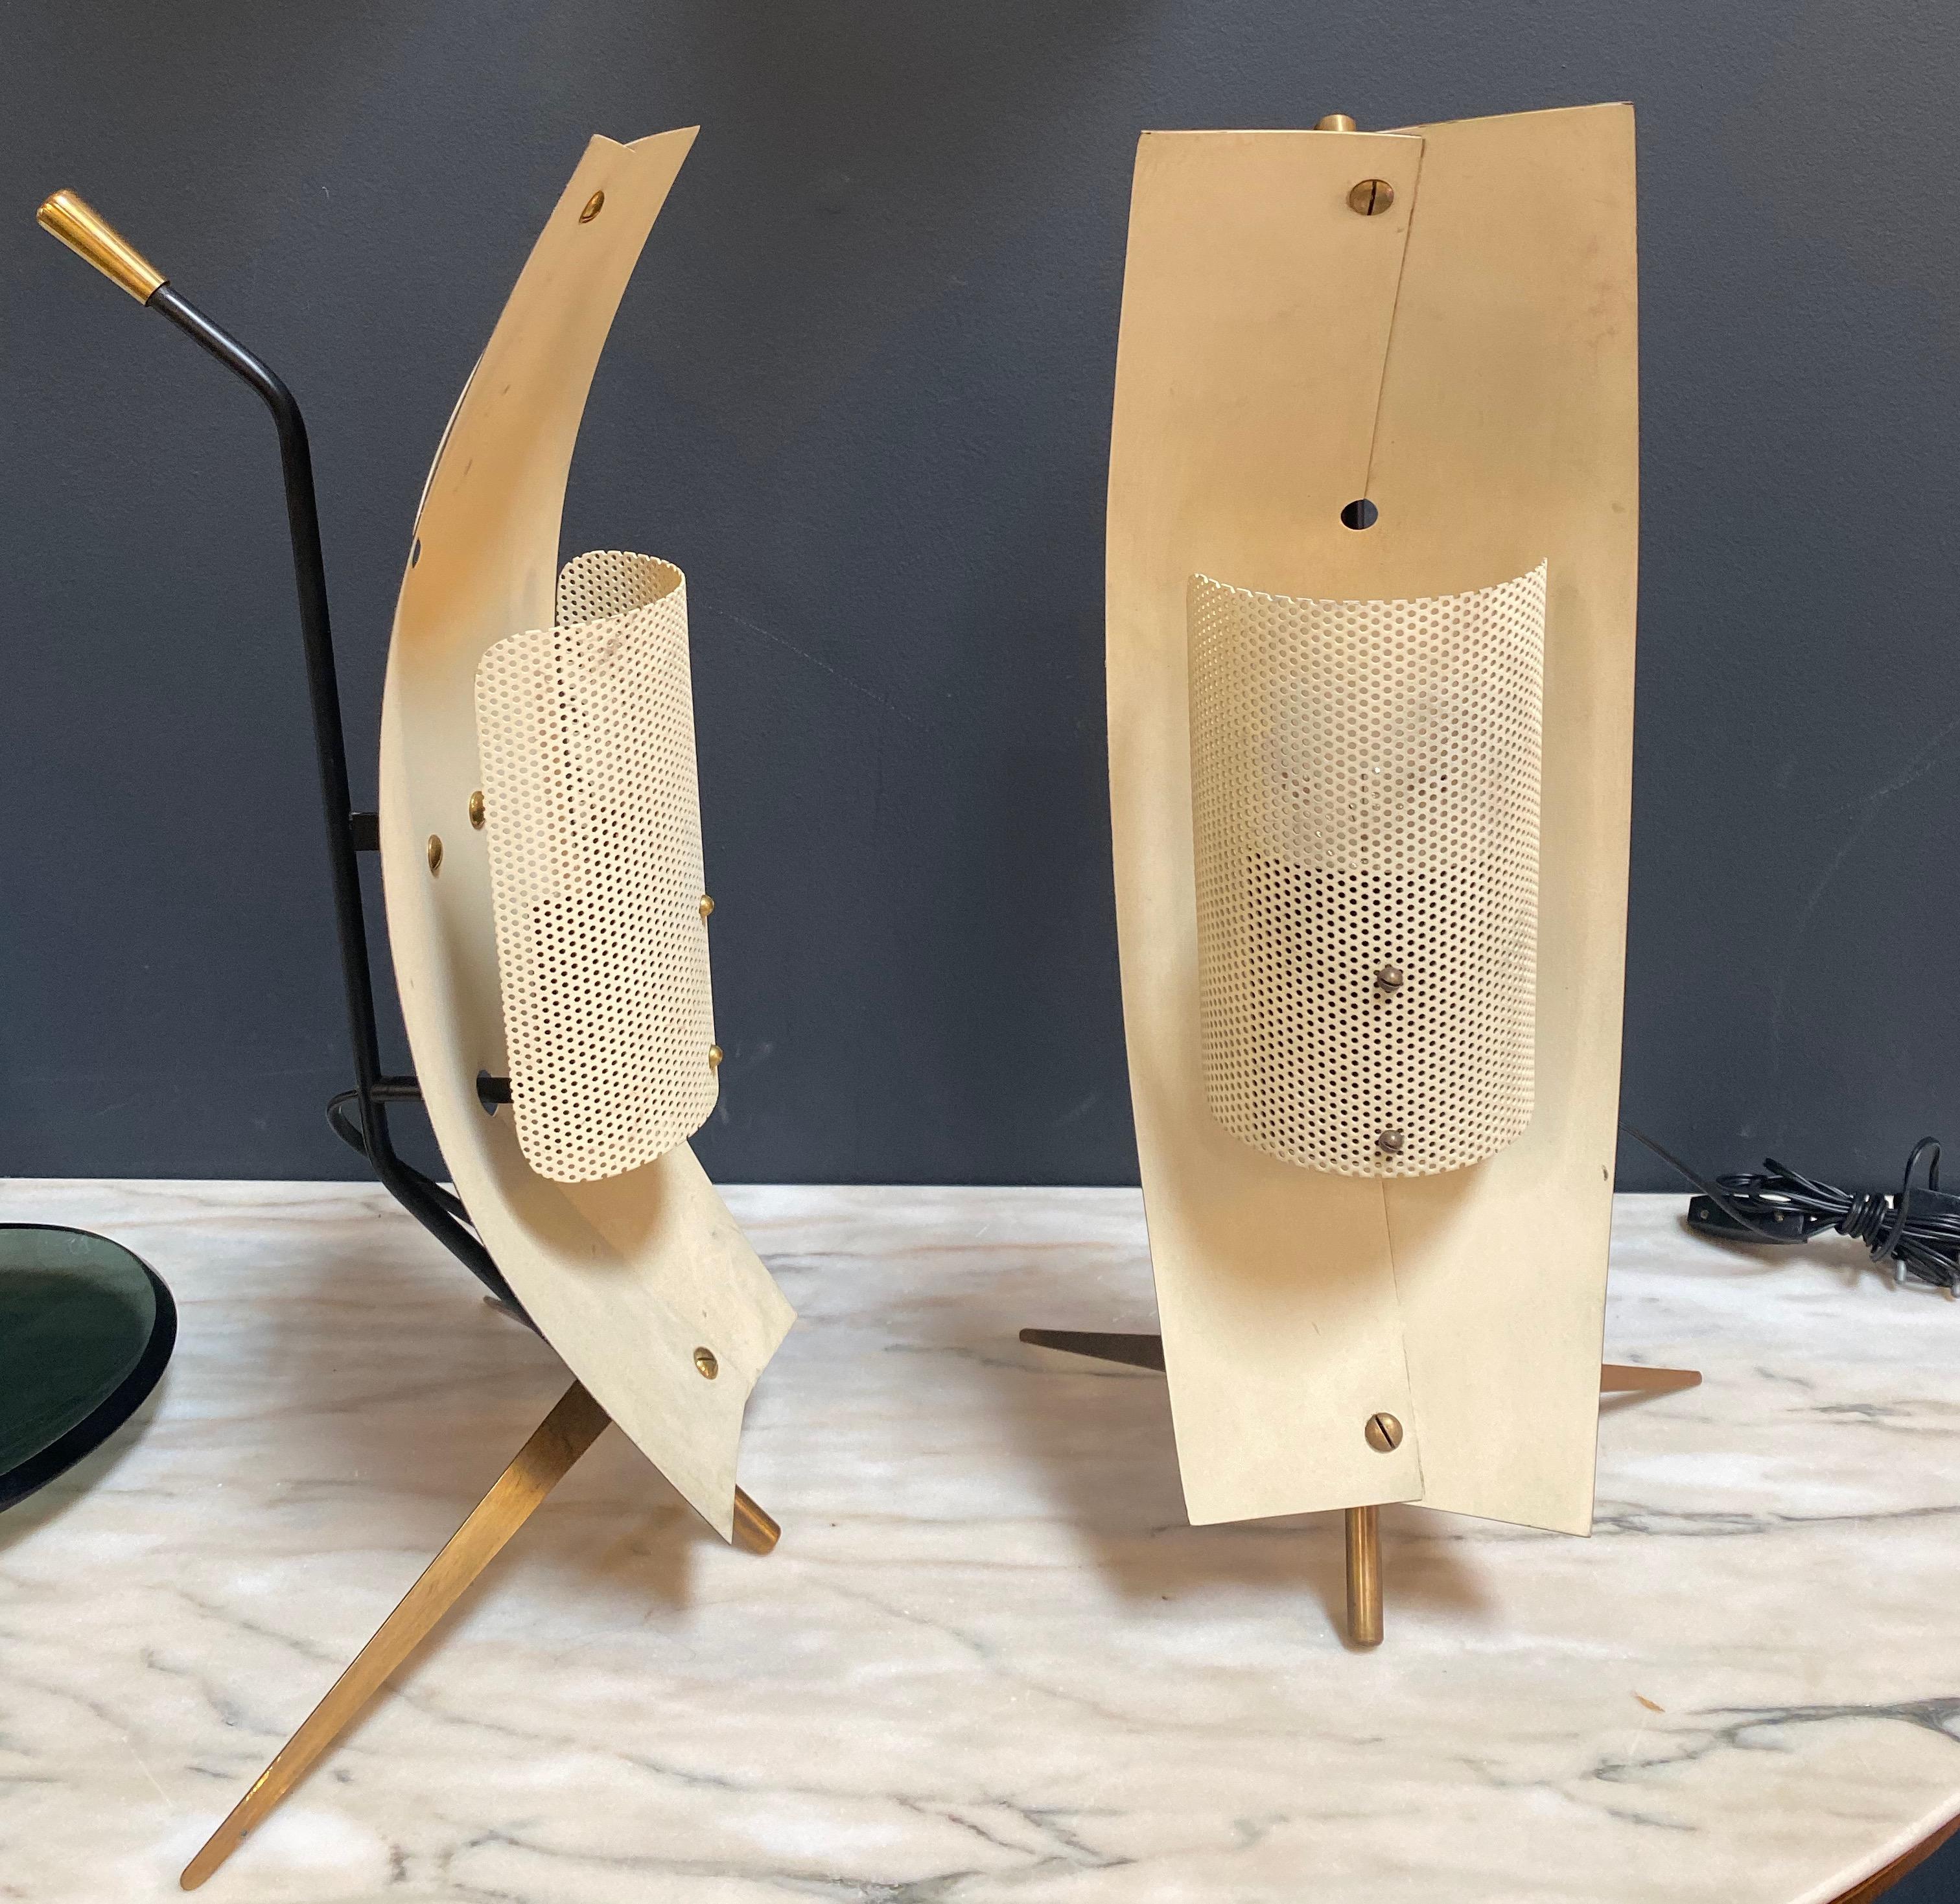 Gastone Colliva: Rare pair of sculptural table lamps in brass and metal, Italy, 1965.
Table lamps in brass, metal and lacquered wood, patent 68062.
Publications; Patents of Italian design 1946-1965 - original patents of Italian design,